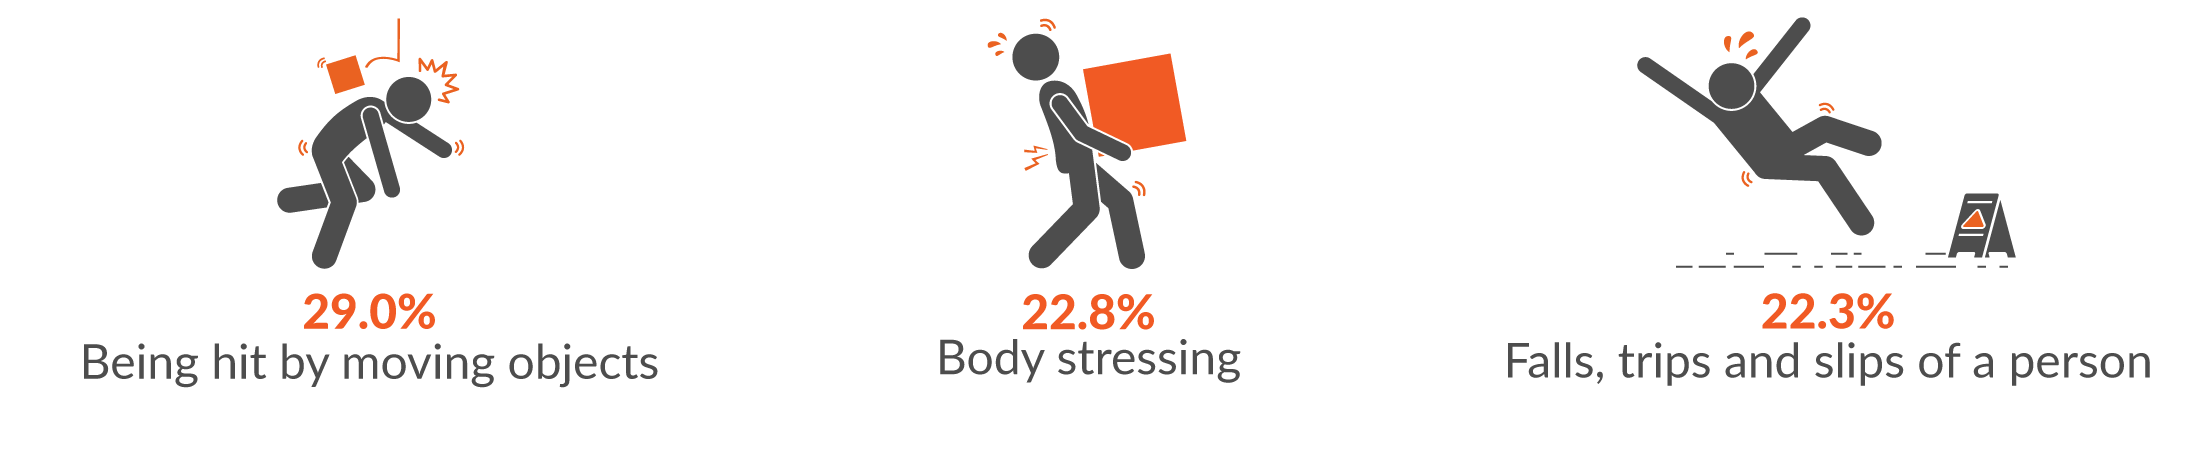 This infographic shows the main three mechanisms for serious injuries were 29.0% being hit by moving objects; 22.8% body stressing; and 22.3% falls, trips and slips of a person.